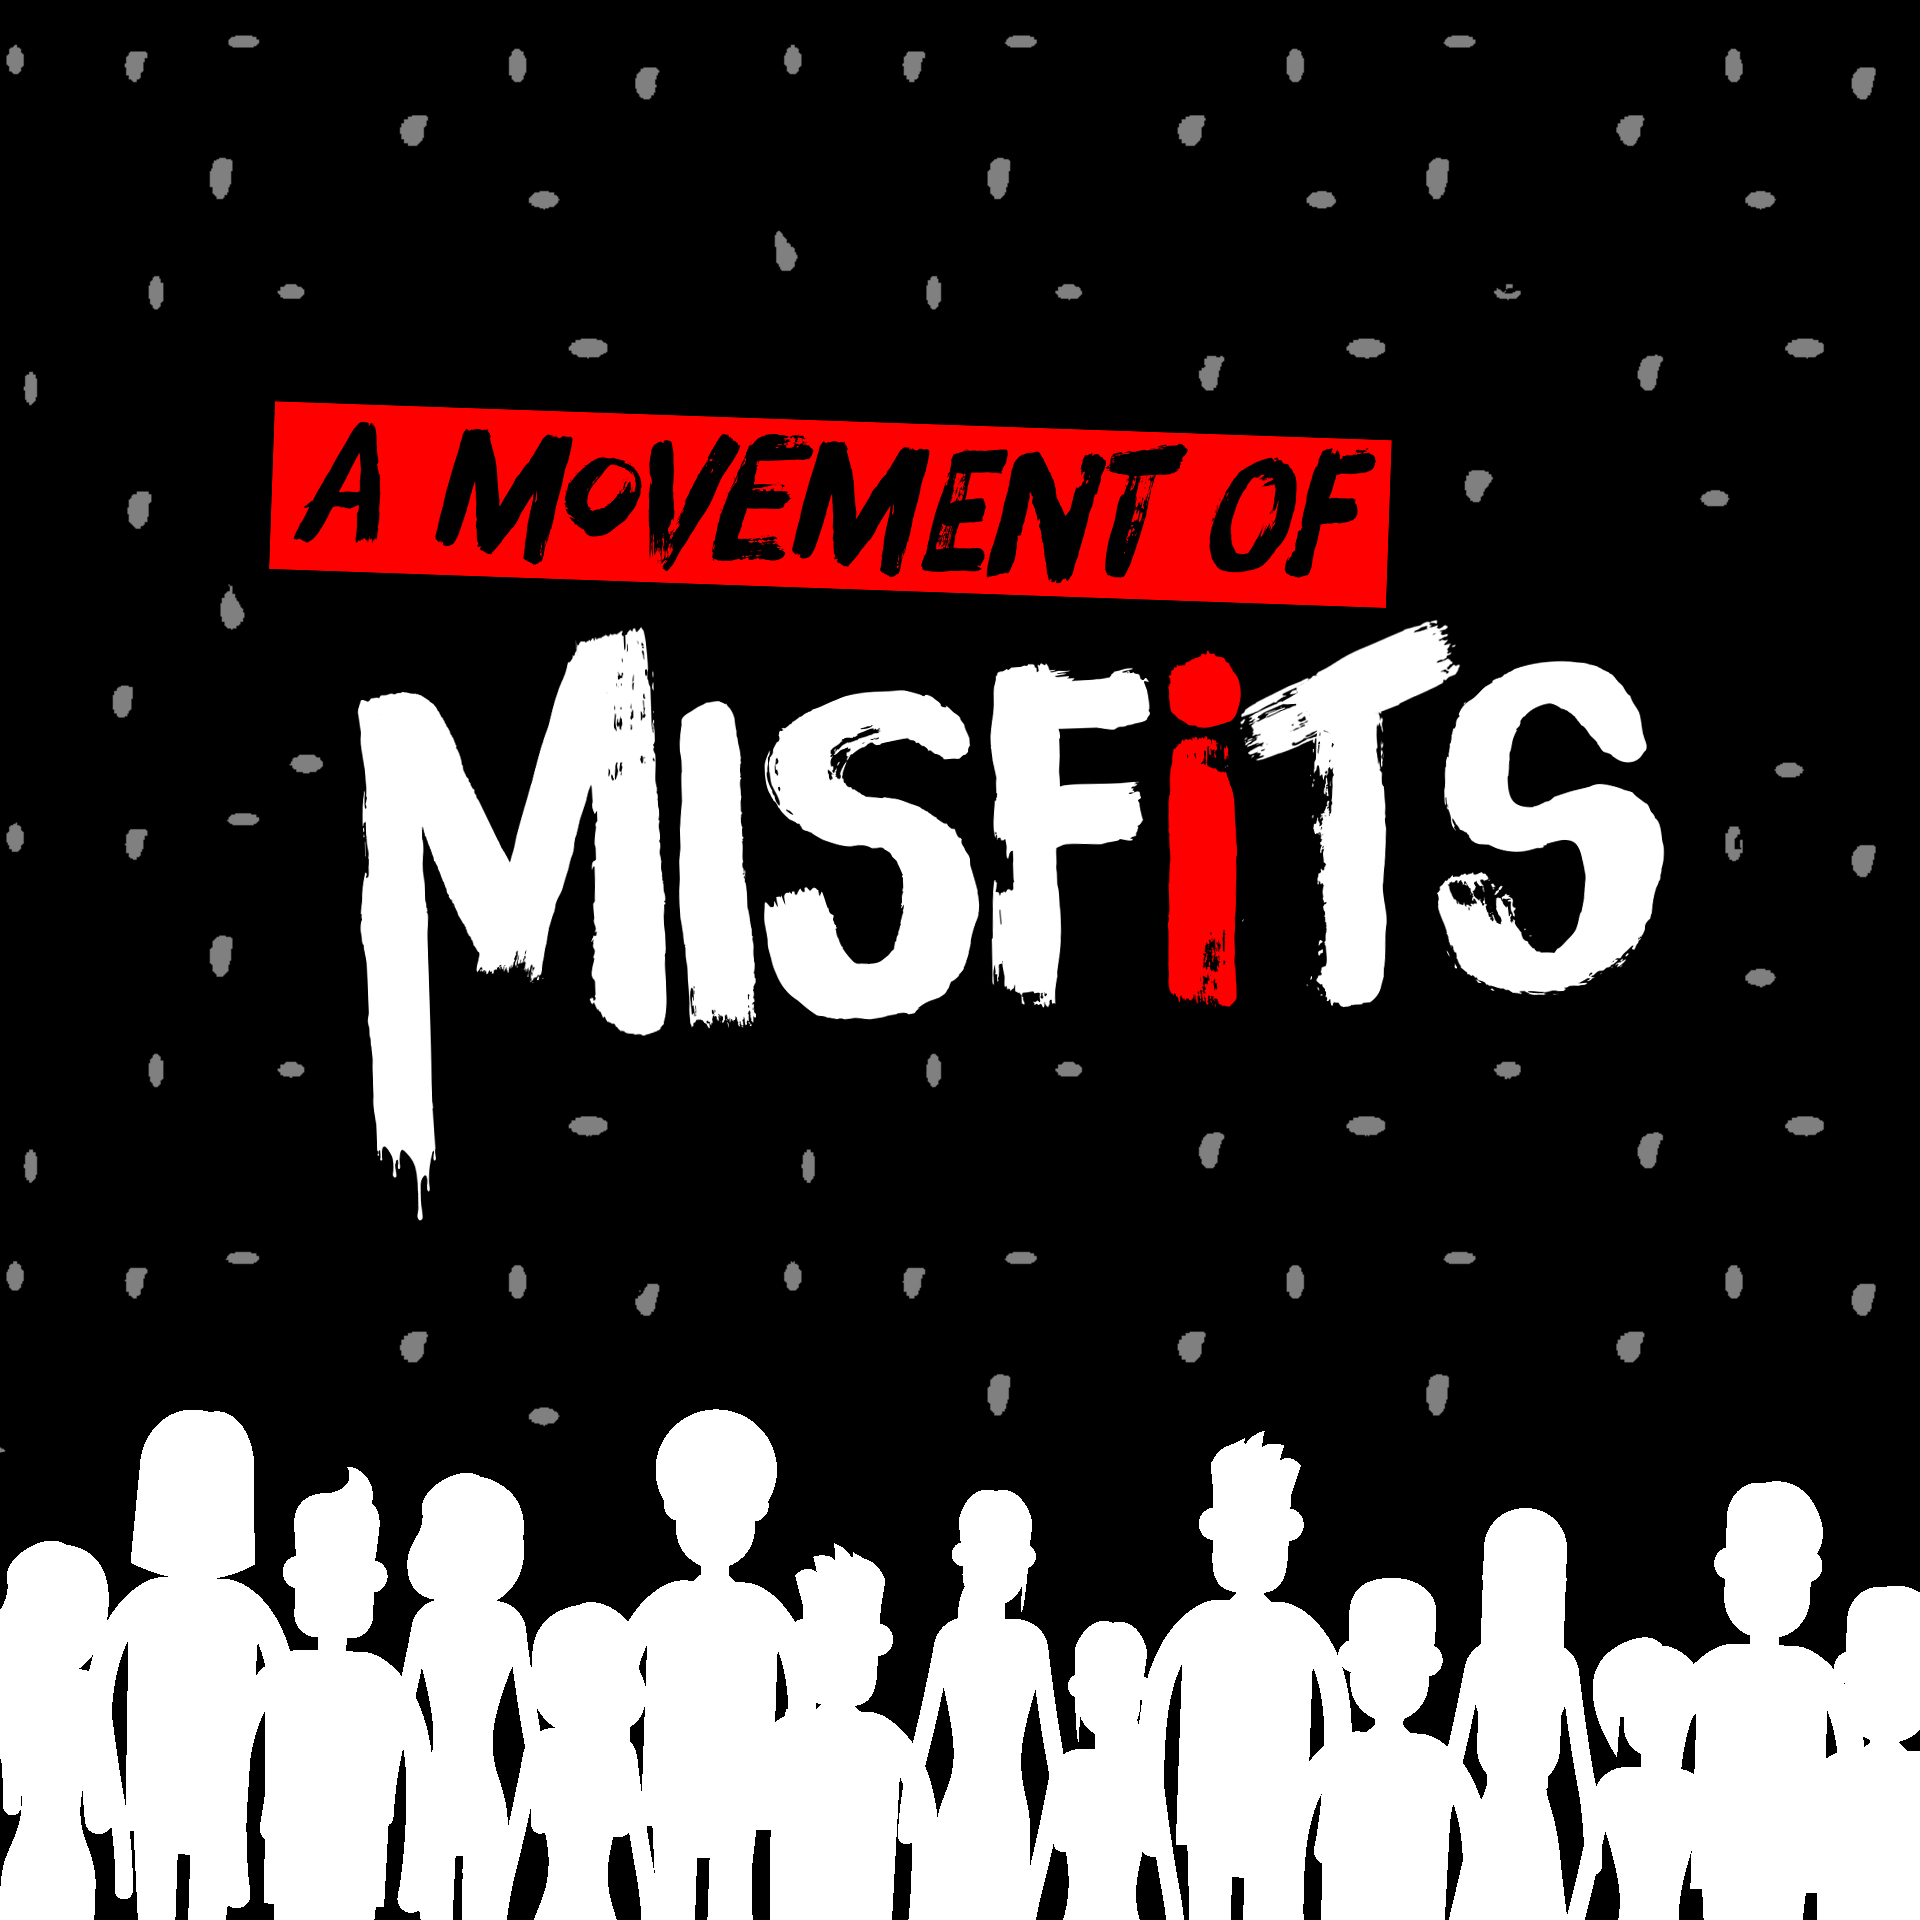 A Movement of Misfits #2: Acts 2:42-47